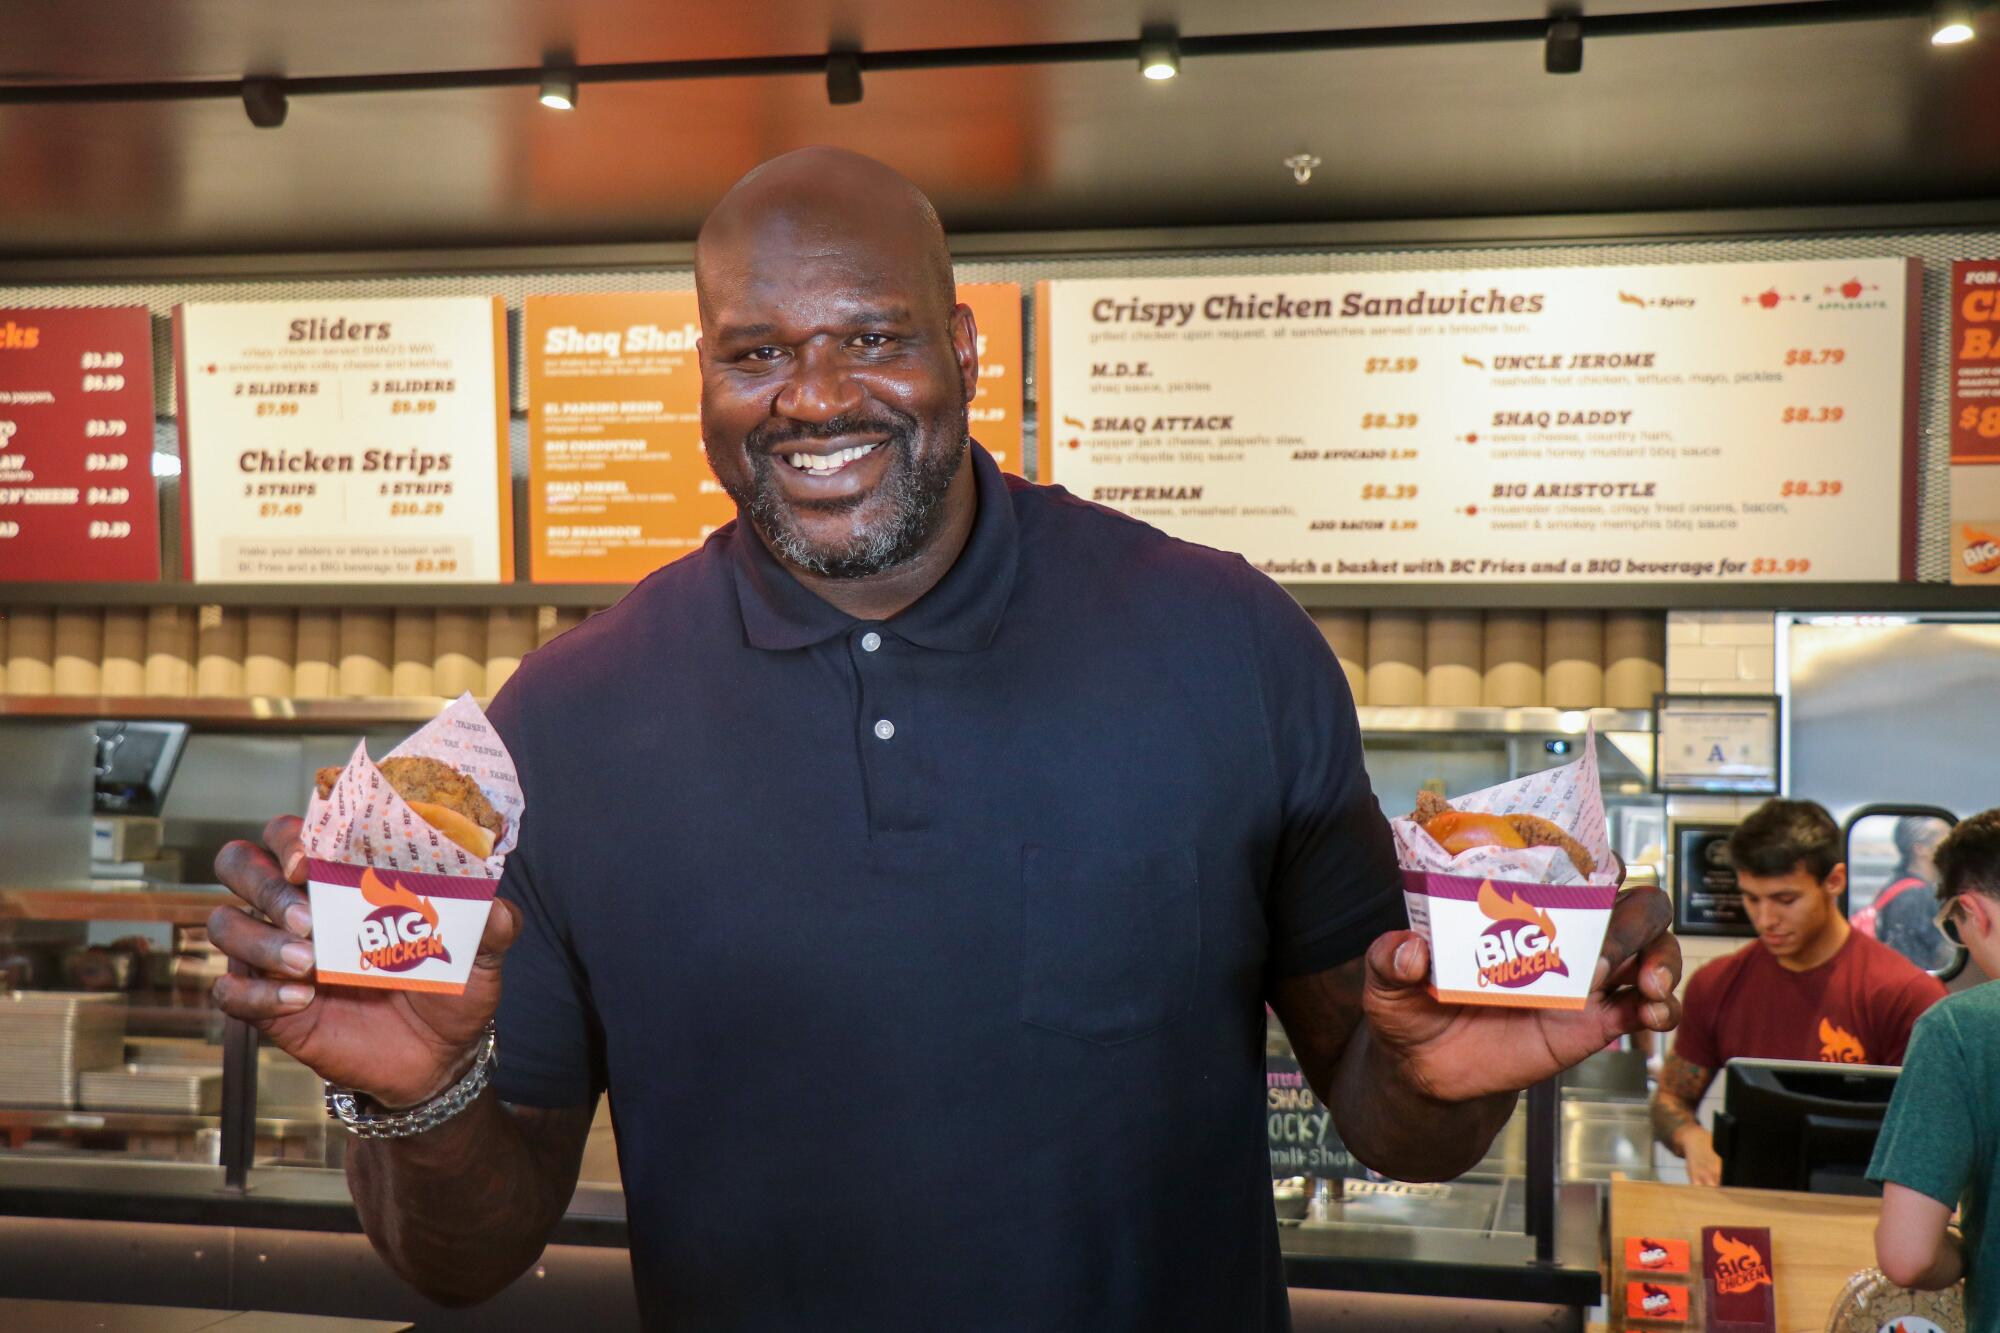 Shaquille O'Neal's holds up samples of fried chicken from his chain restaurant 